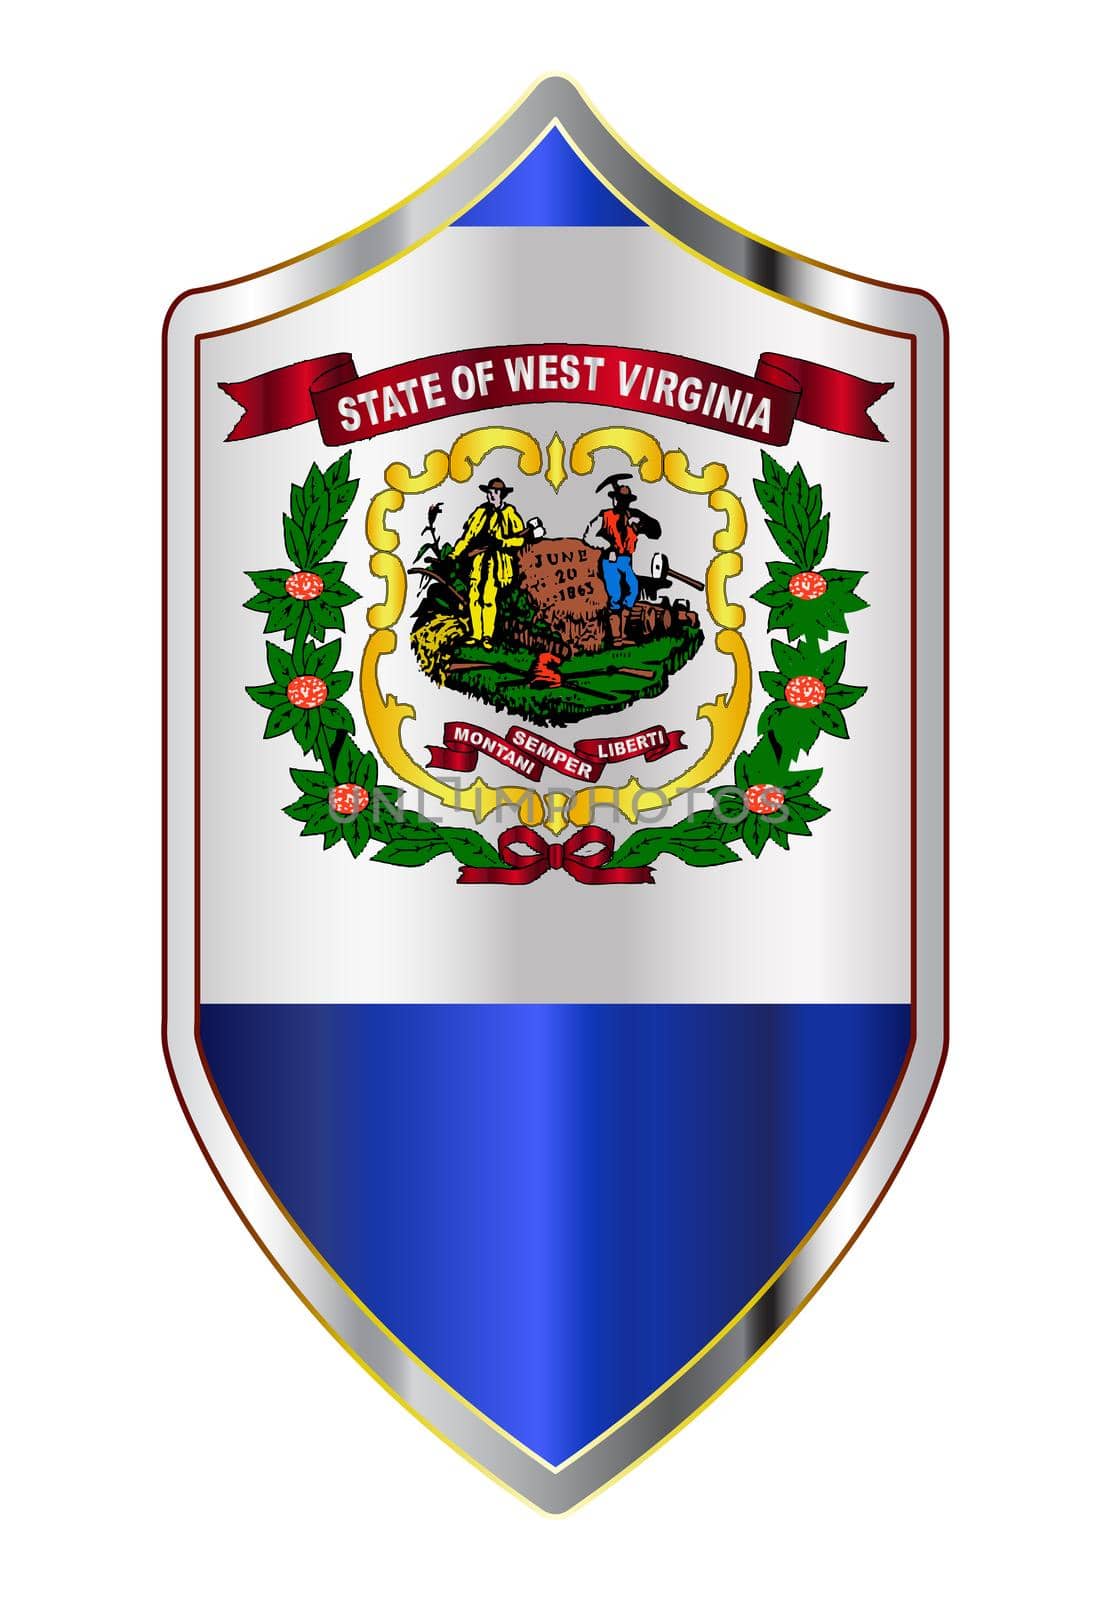 A typical crusader type shield with the state flag of West Virginia all isolated on a white background